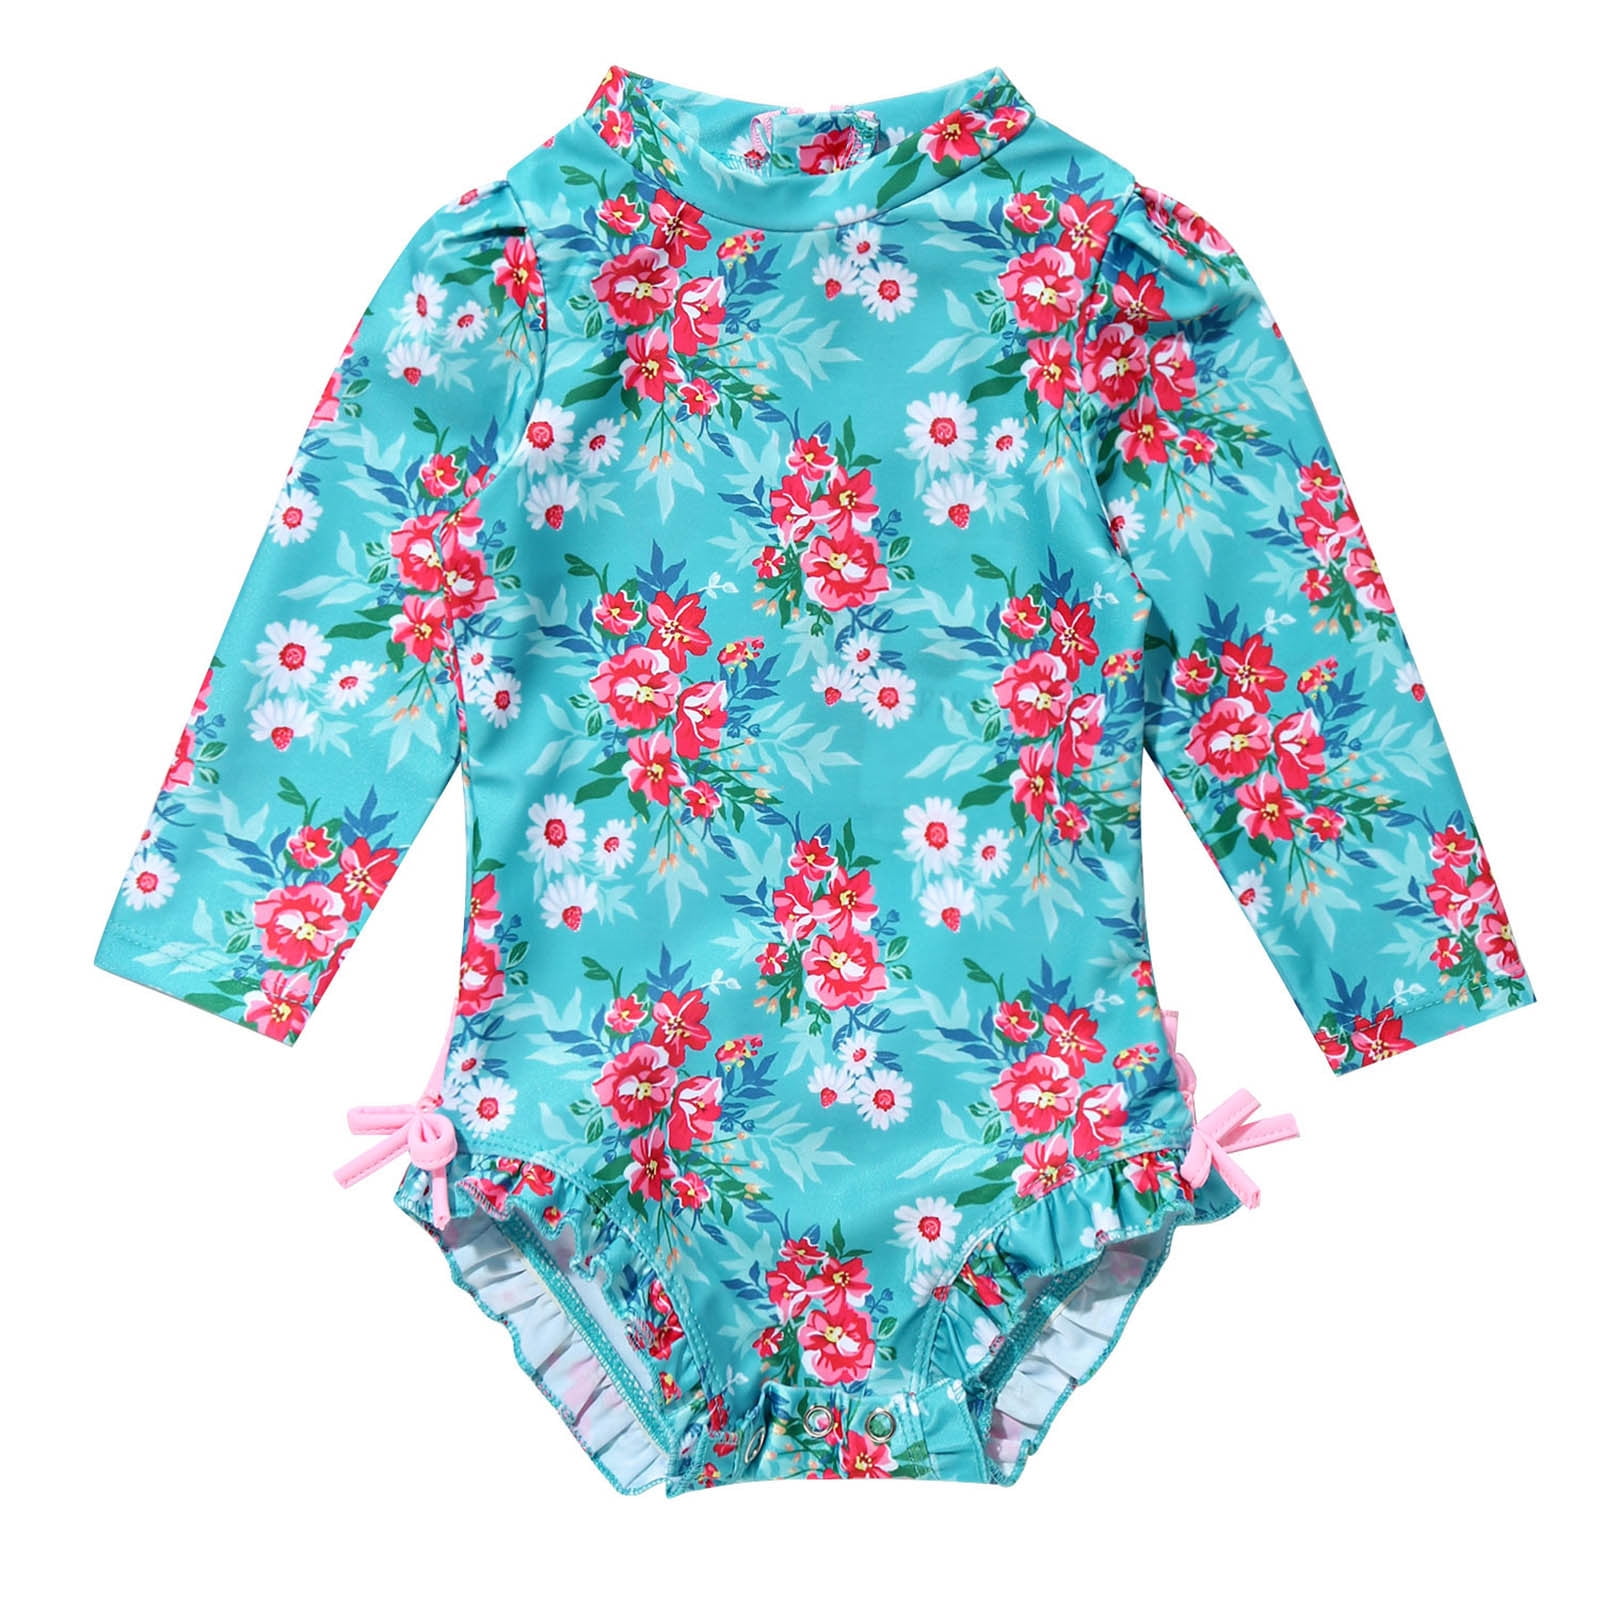 DPOIS Infant Baby Girls Rash Guard One Piece Long Sleeves Floral ...